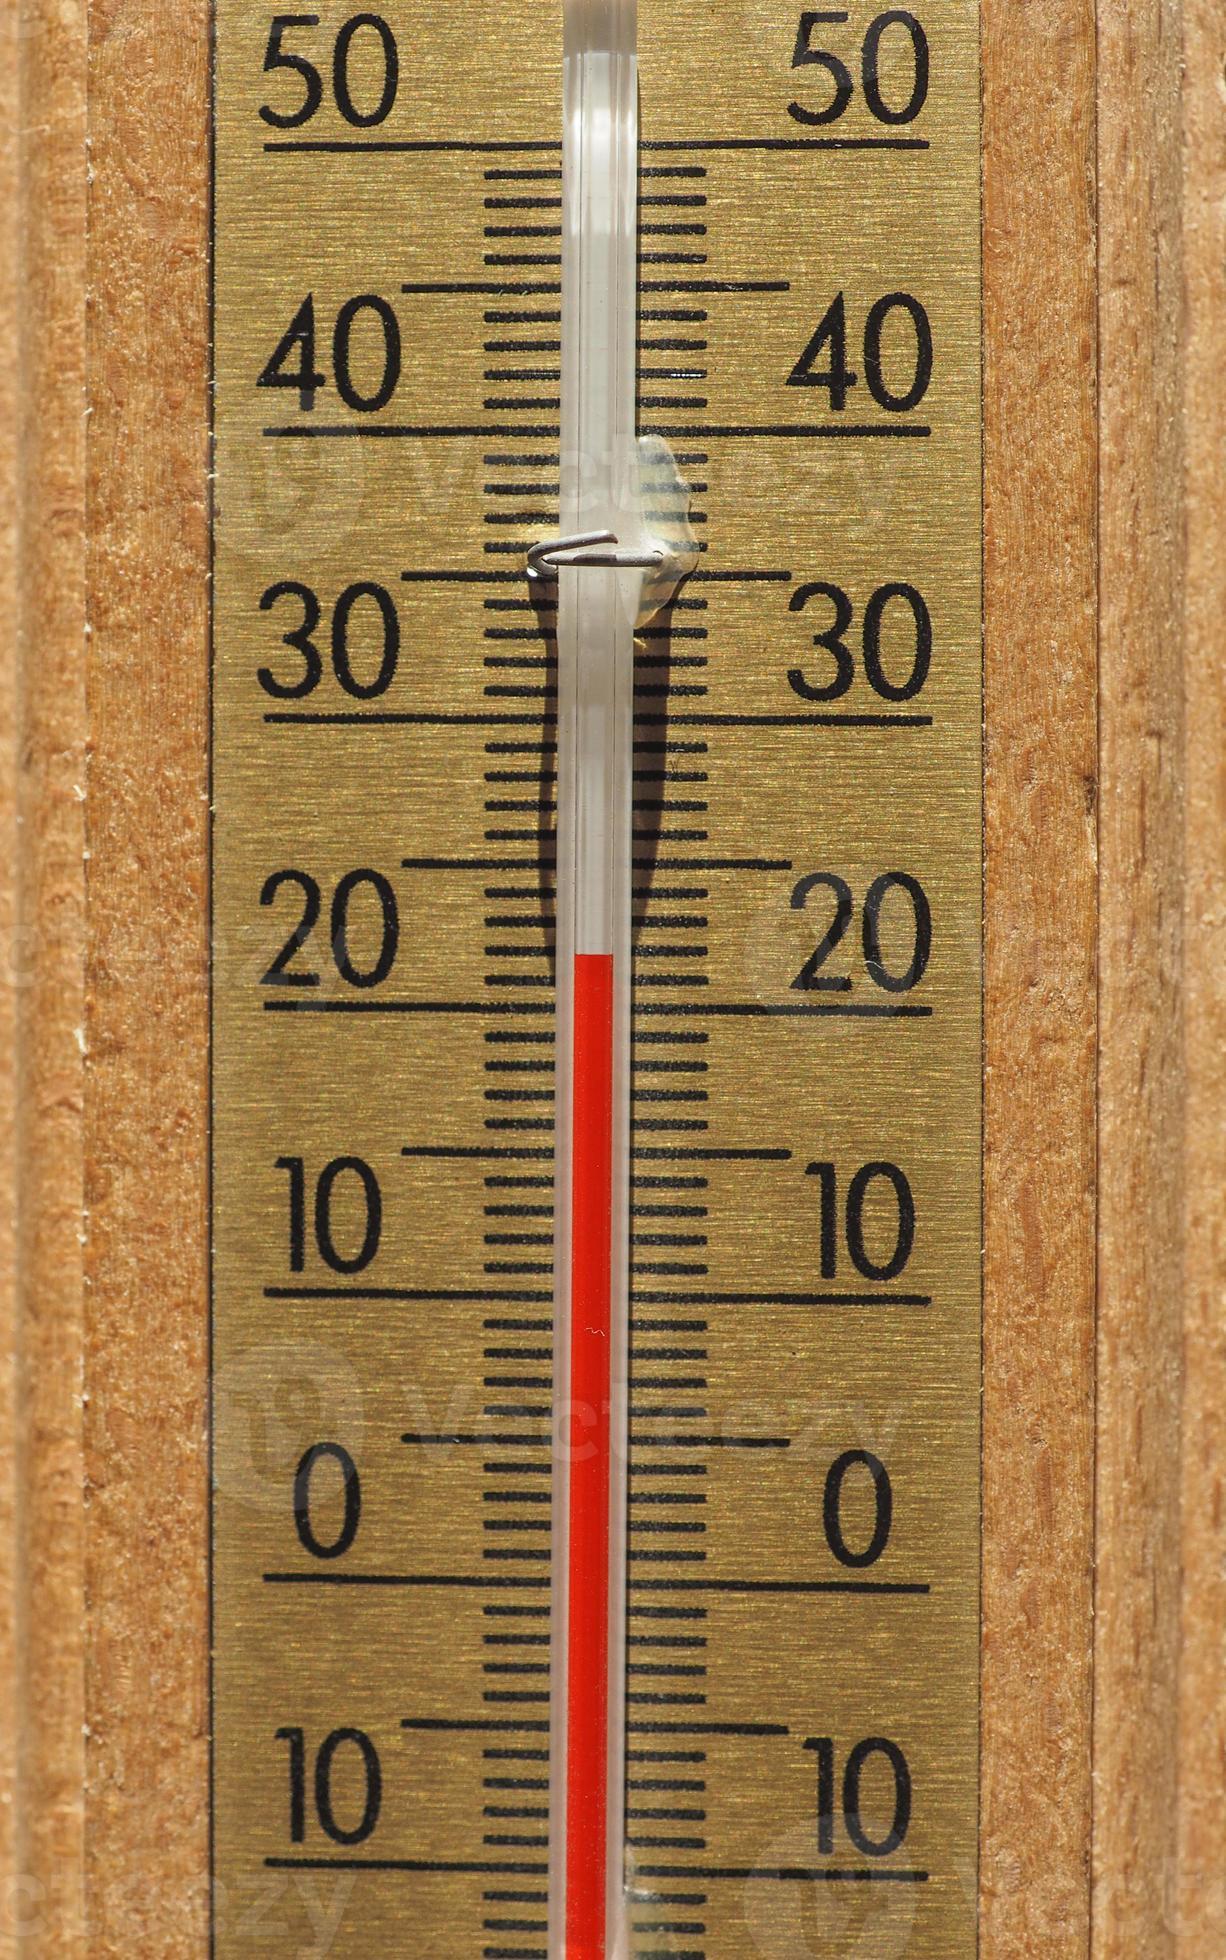 https://static.vecteezy.com/system/resources/previews/003/156/853/large_2x/thermometer-for-air-temperature-measurement-photo.jpg